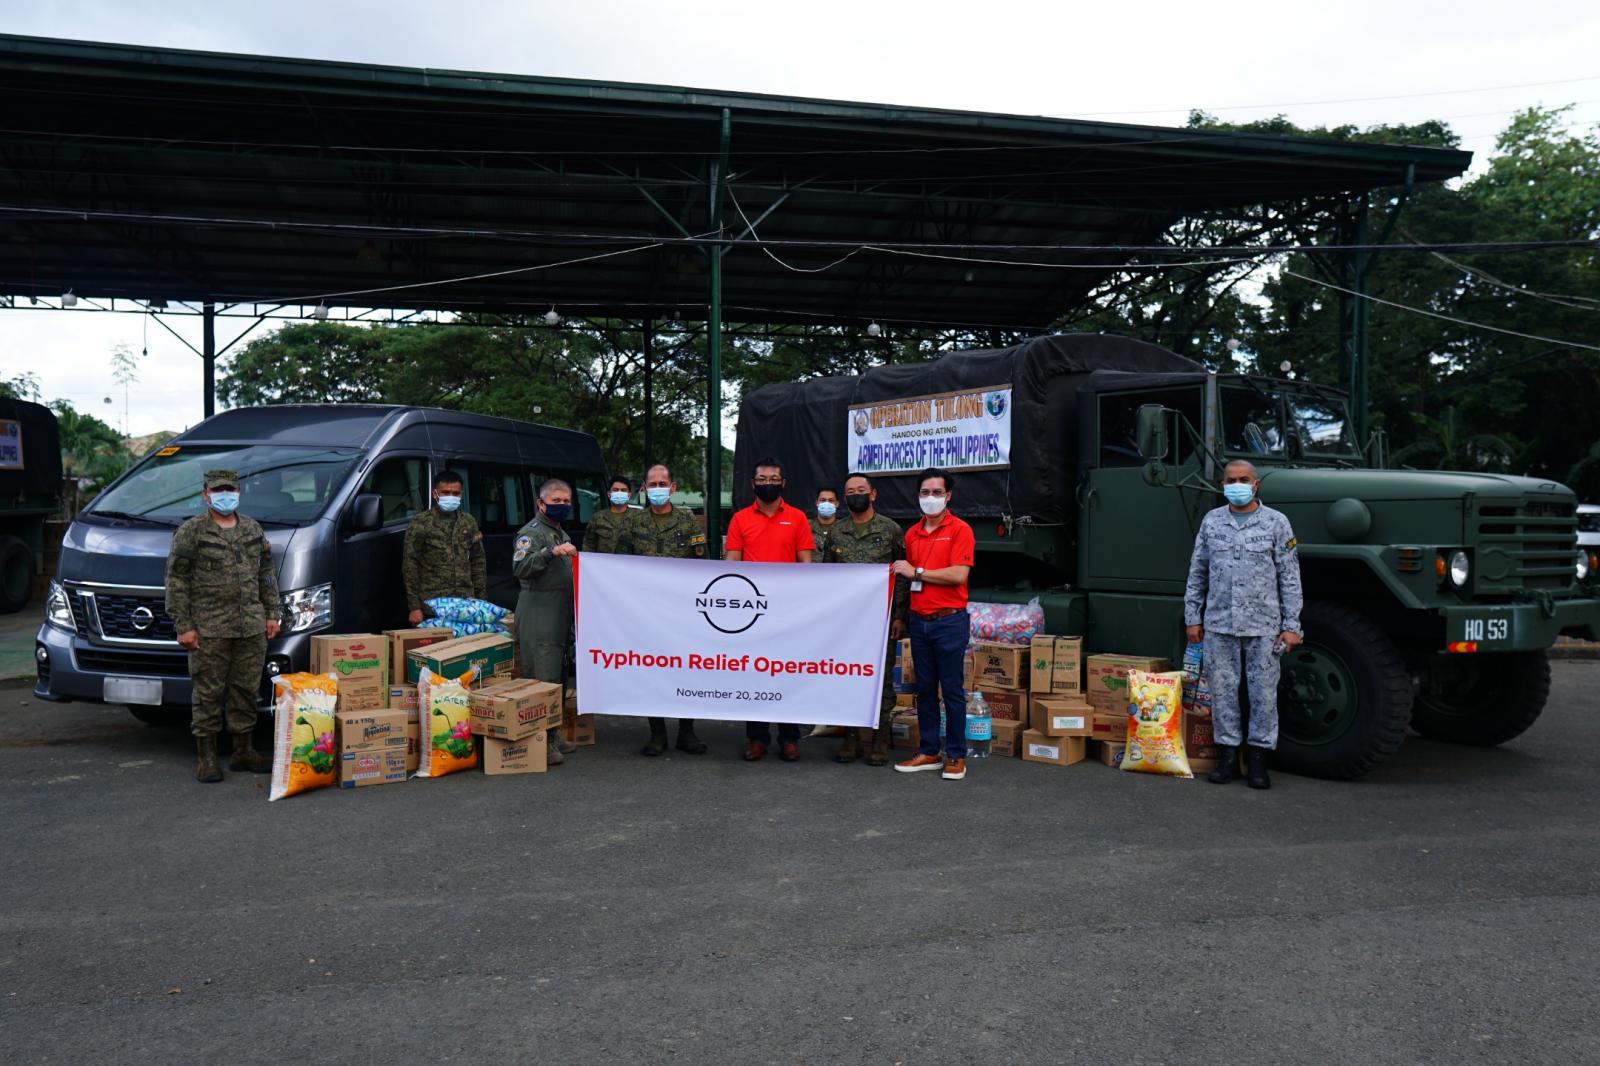 Nissan Philippines joins relief efforts for typhoon victims